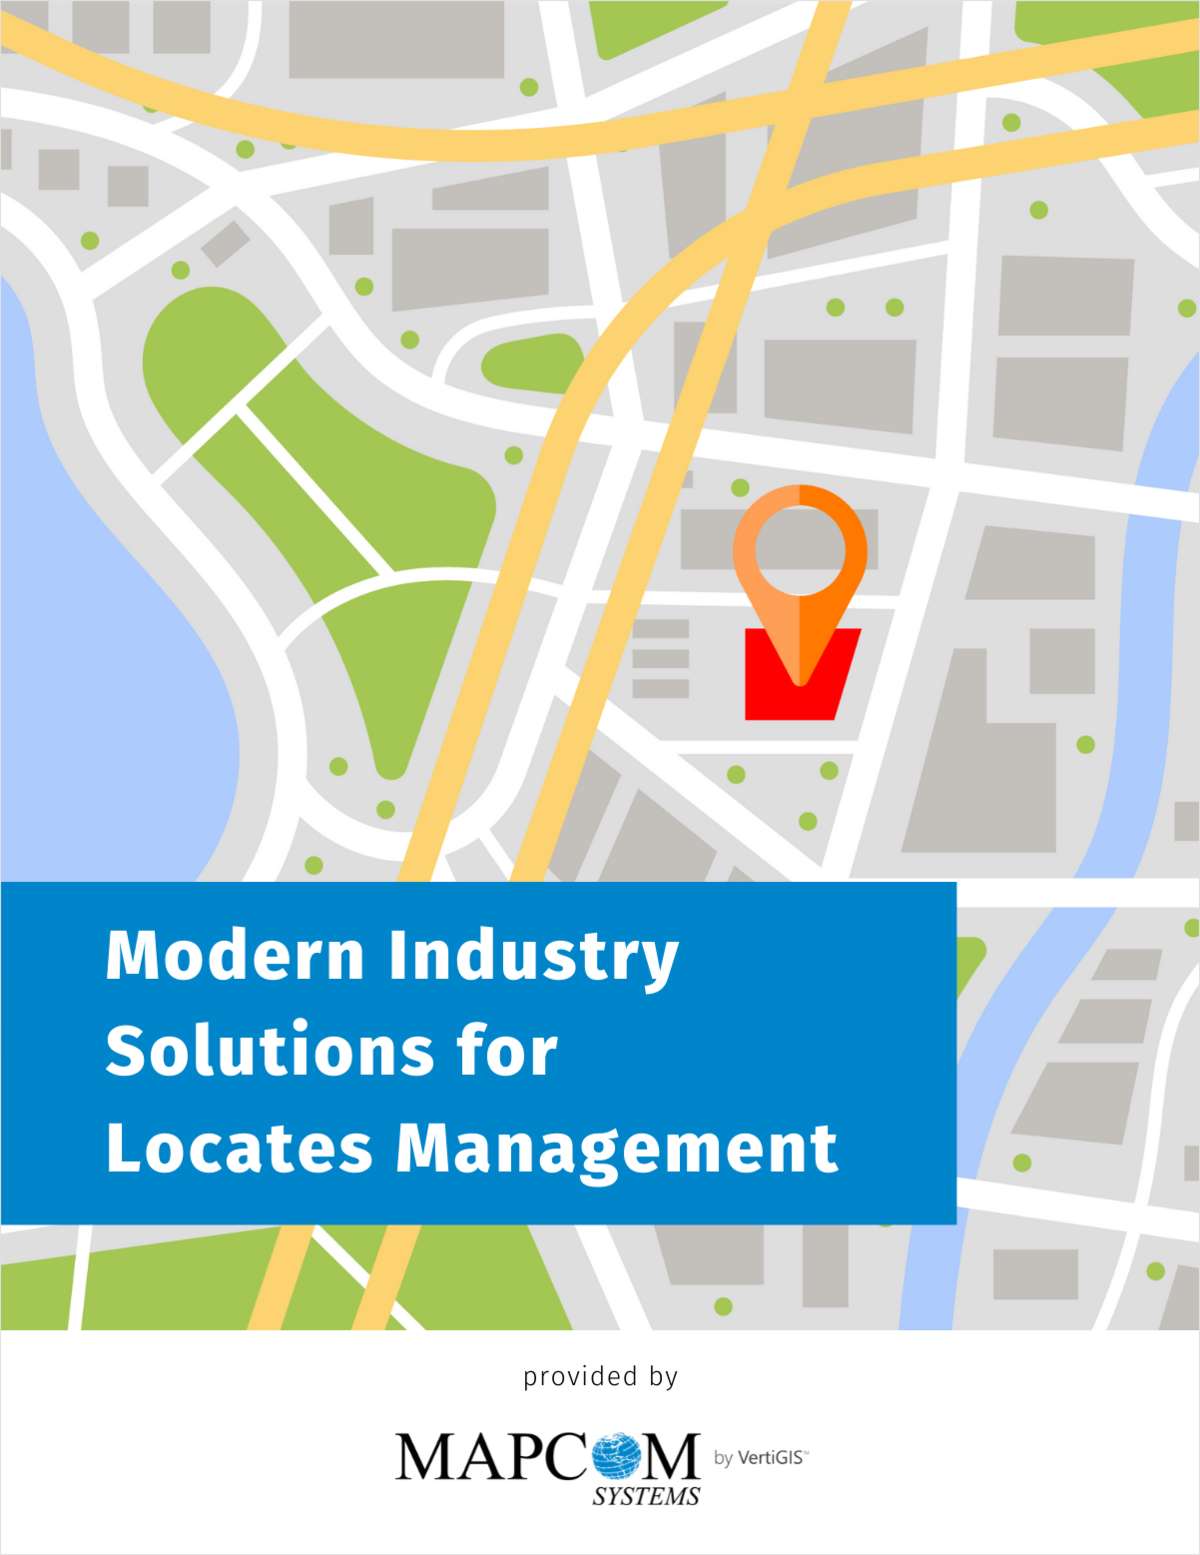 Modern Industry Solutions for Locates Management